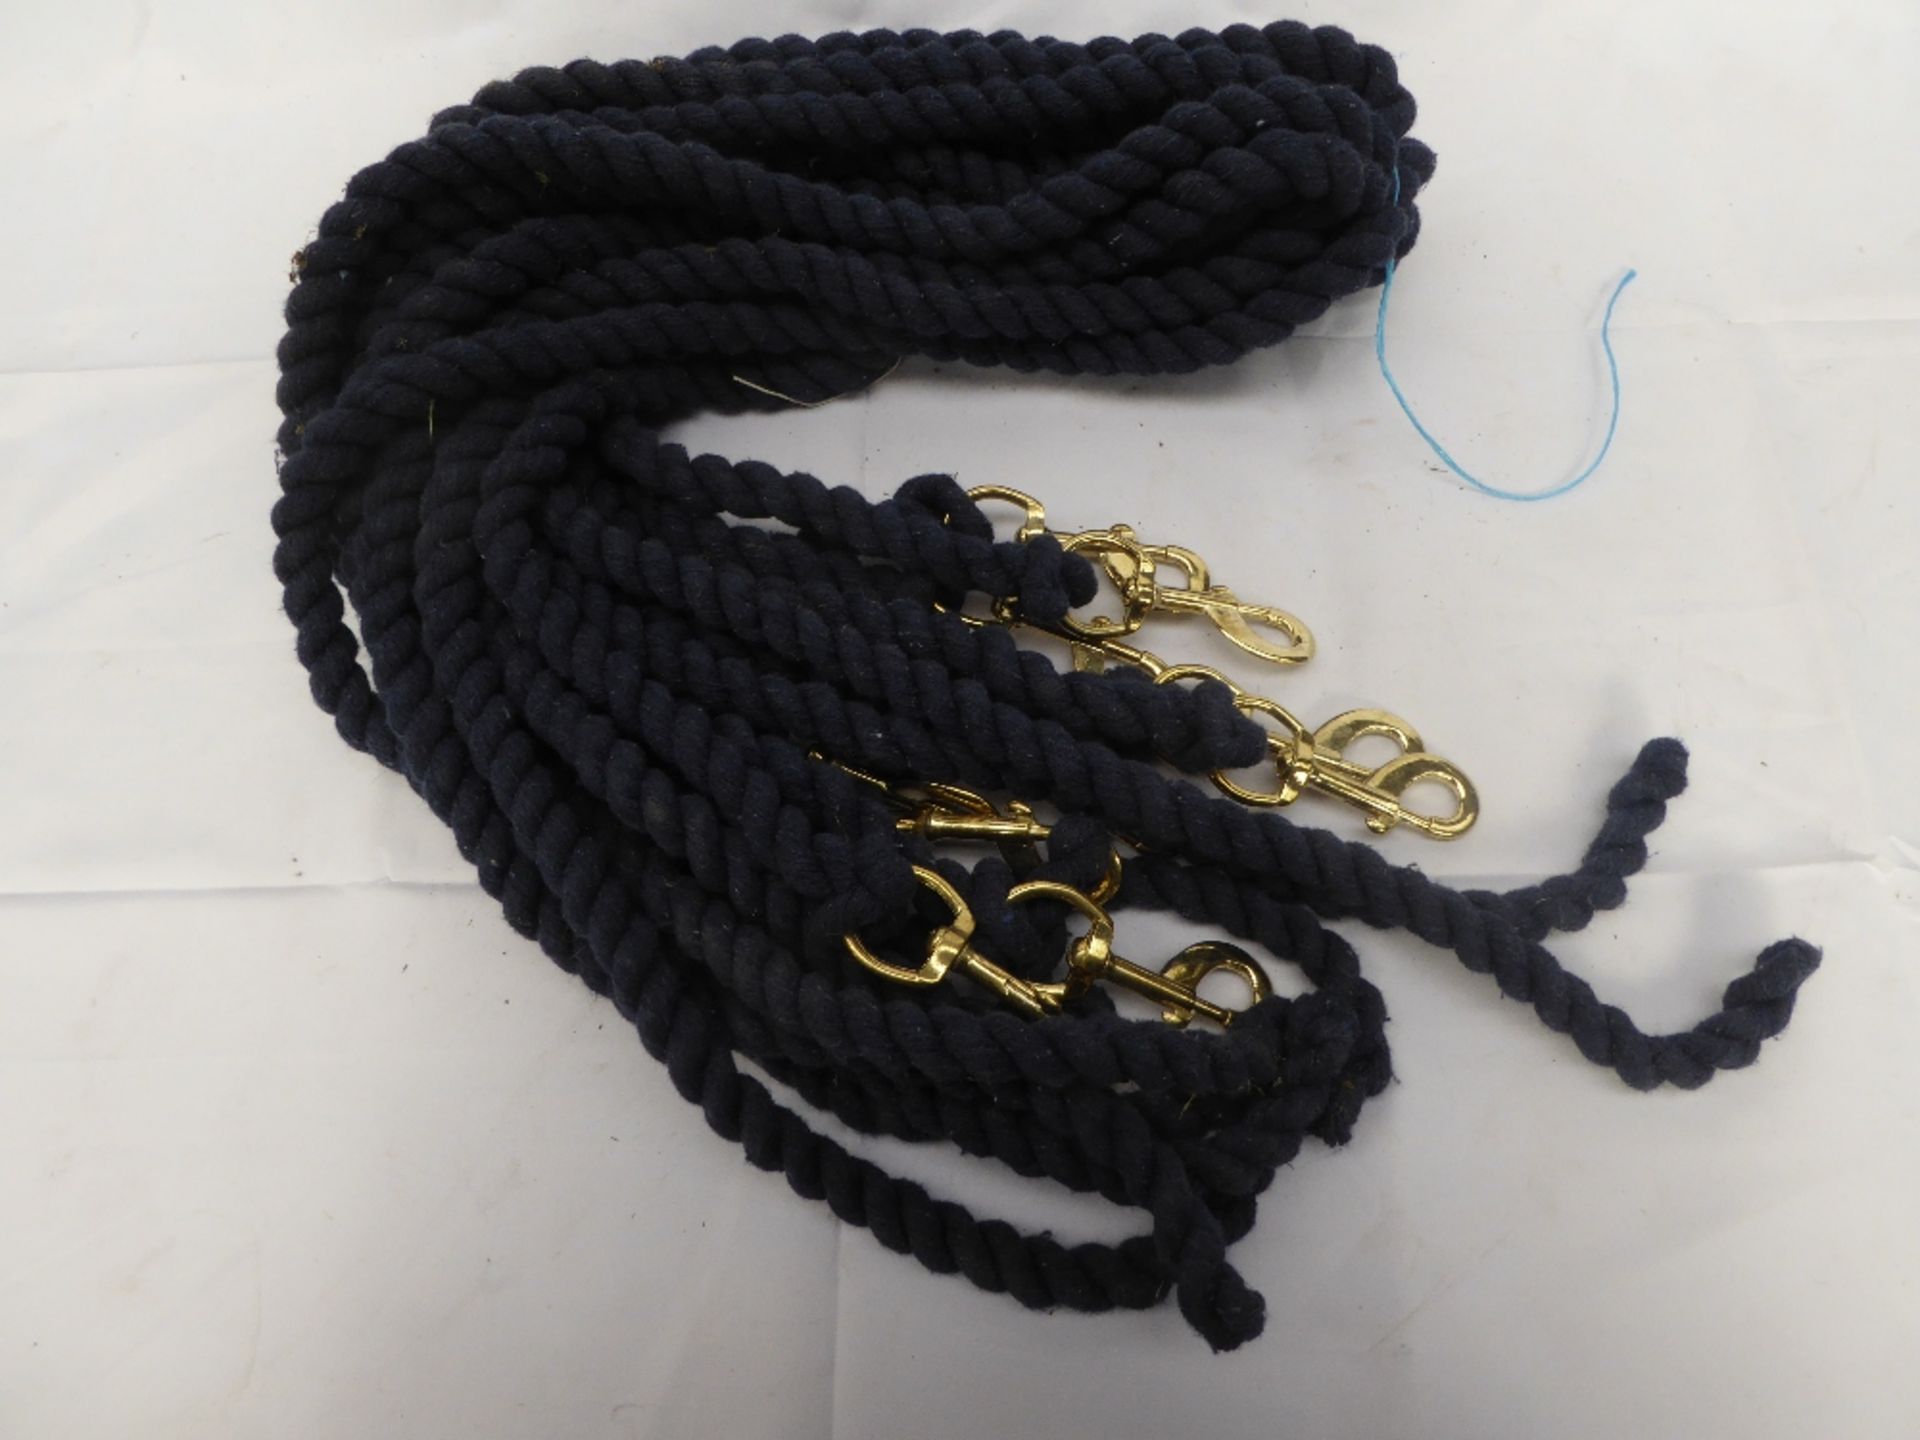 10 x lead ropes - carries VAT